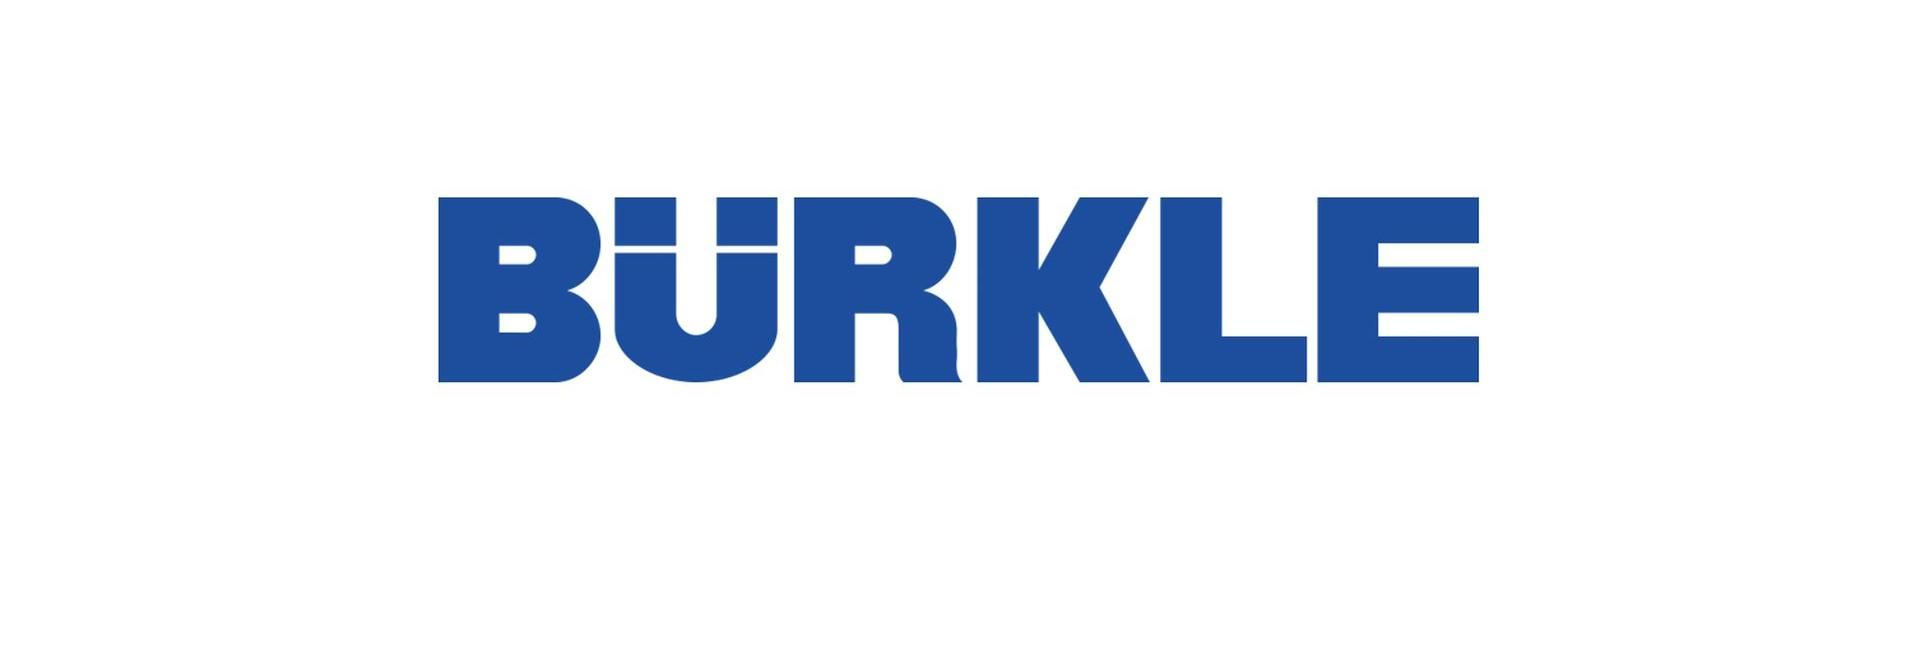 Bürkle Celebrates Plant Expansion Carried Out At Record Speed in Debrecen